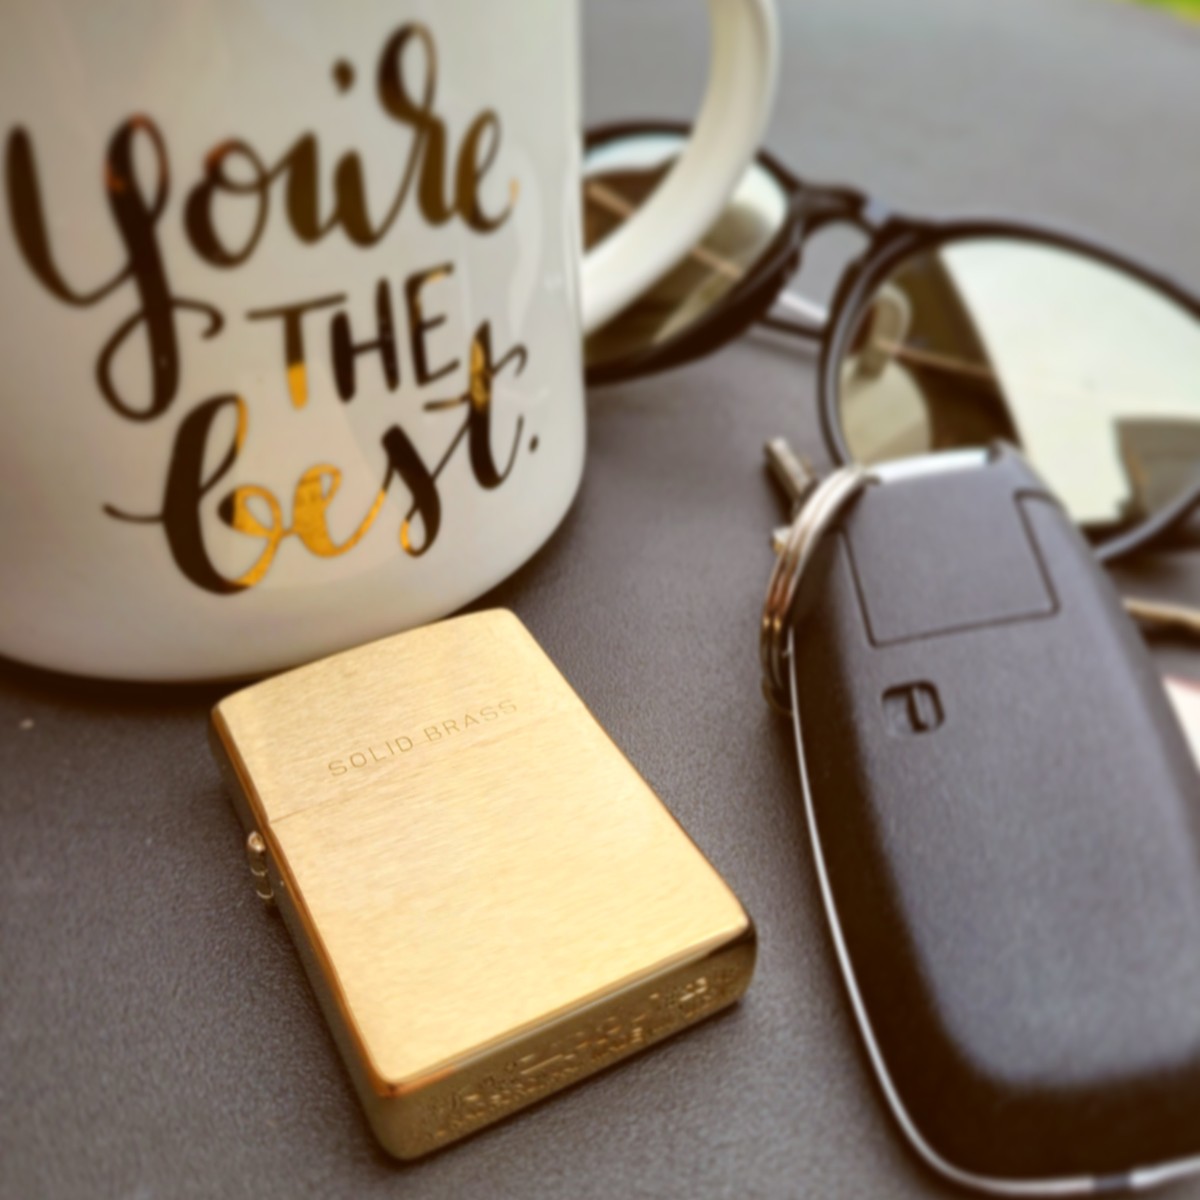 Simply the best ✨ Find your summertime staple at zippo.com

Model: Classic Brushed Solid Brass
📷: emilydo282

#Zippo #MadeInUSA #ZippoFanFeature